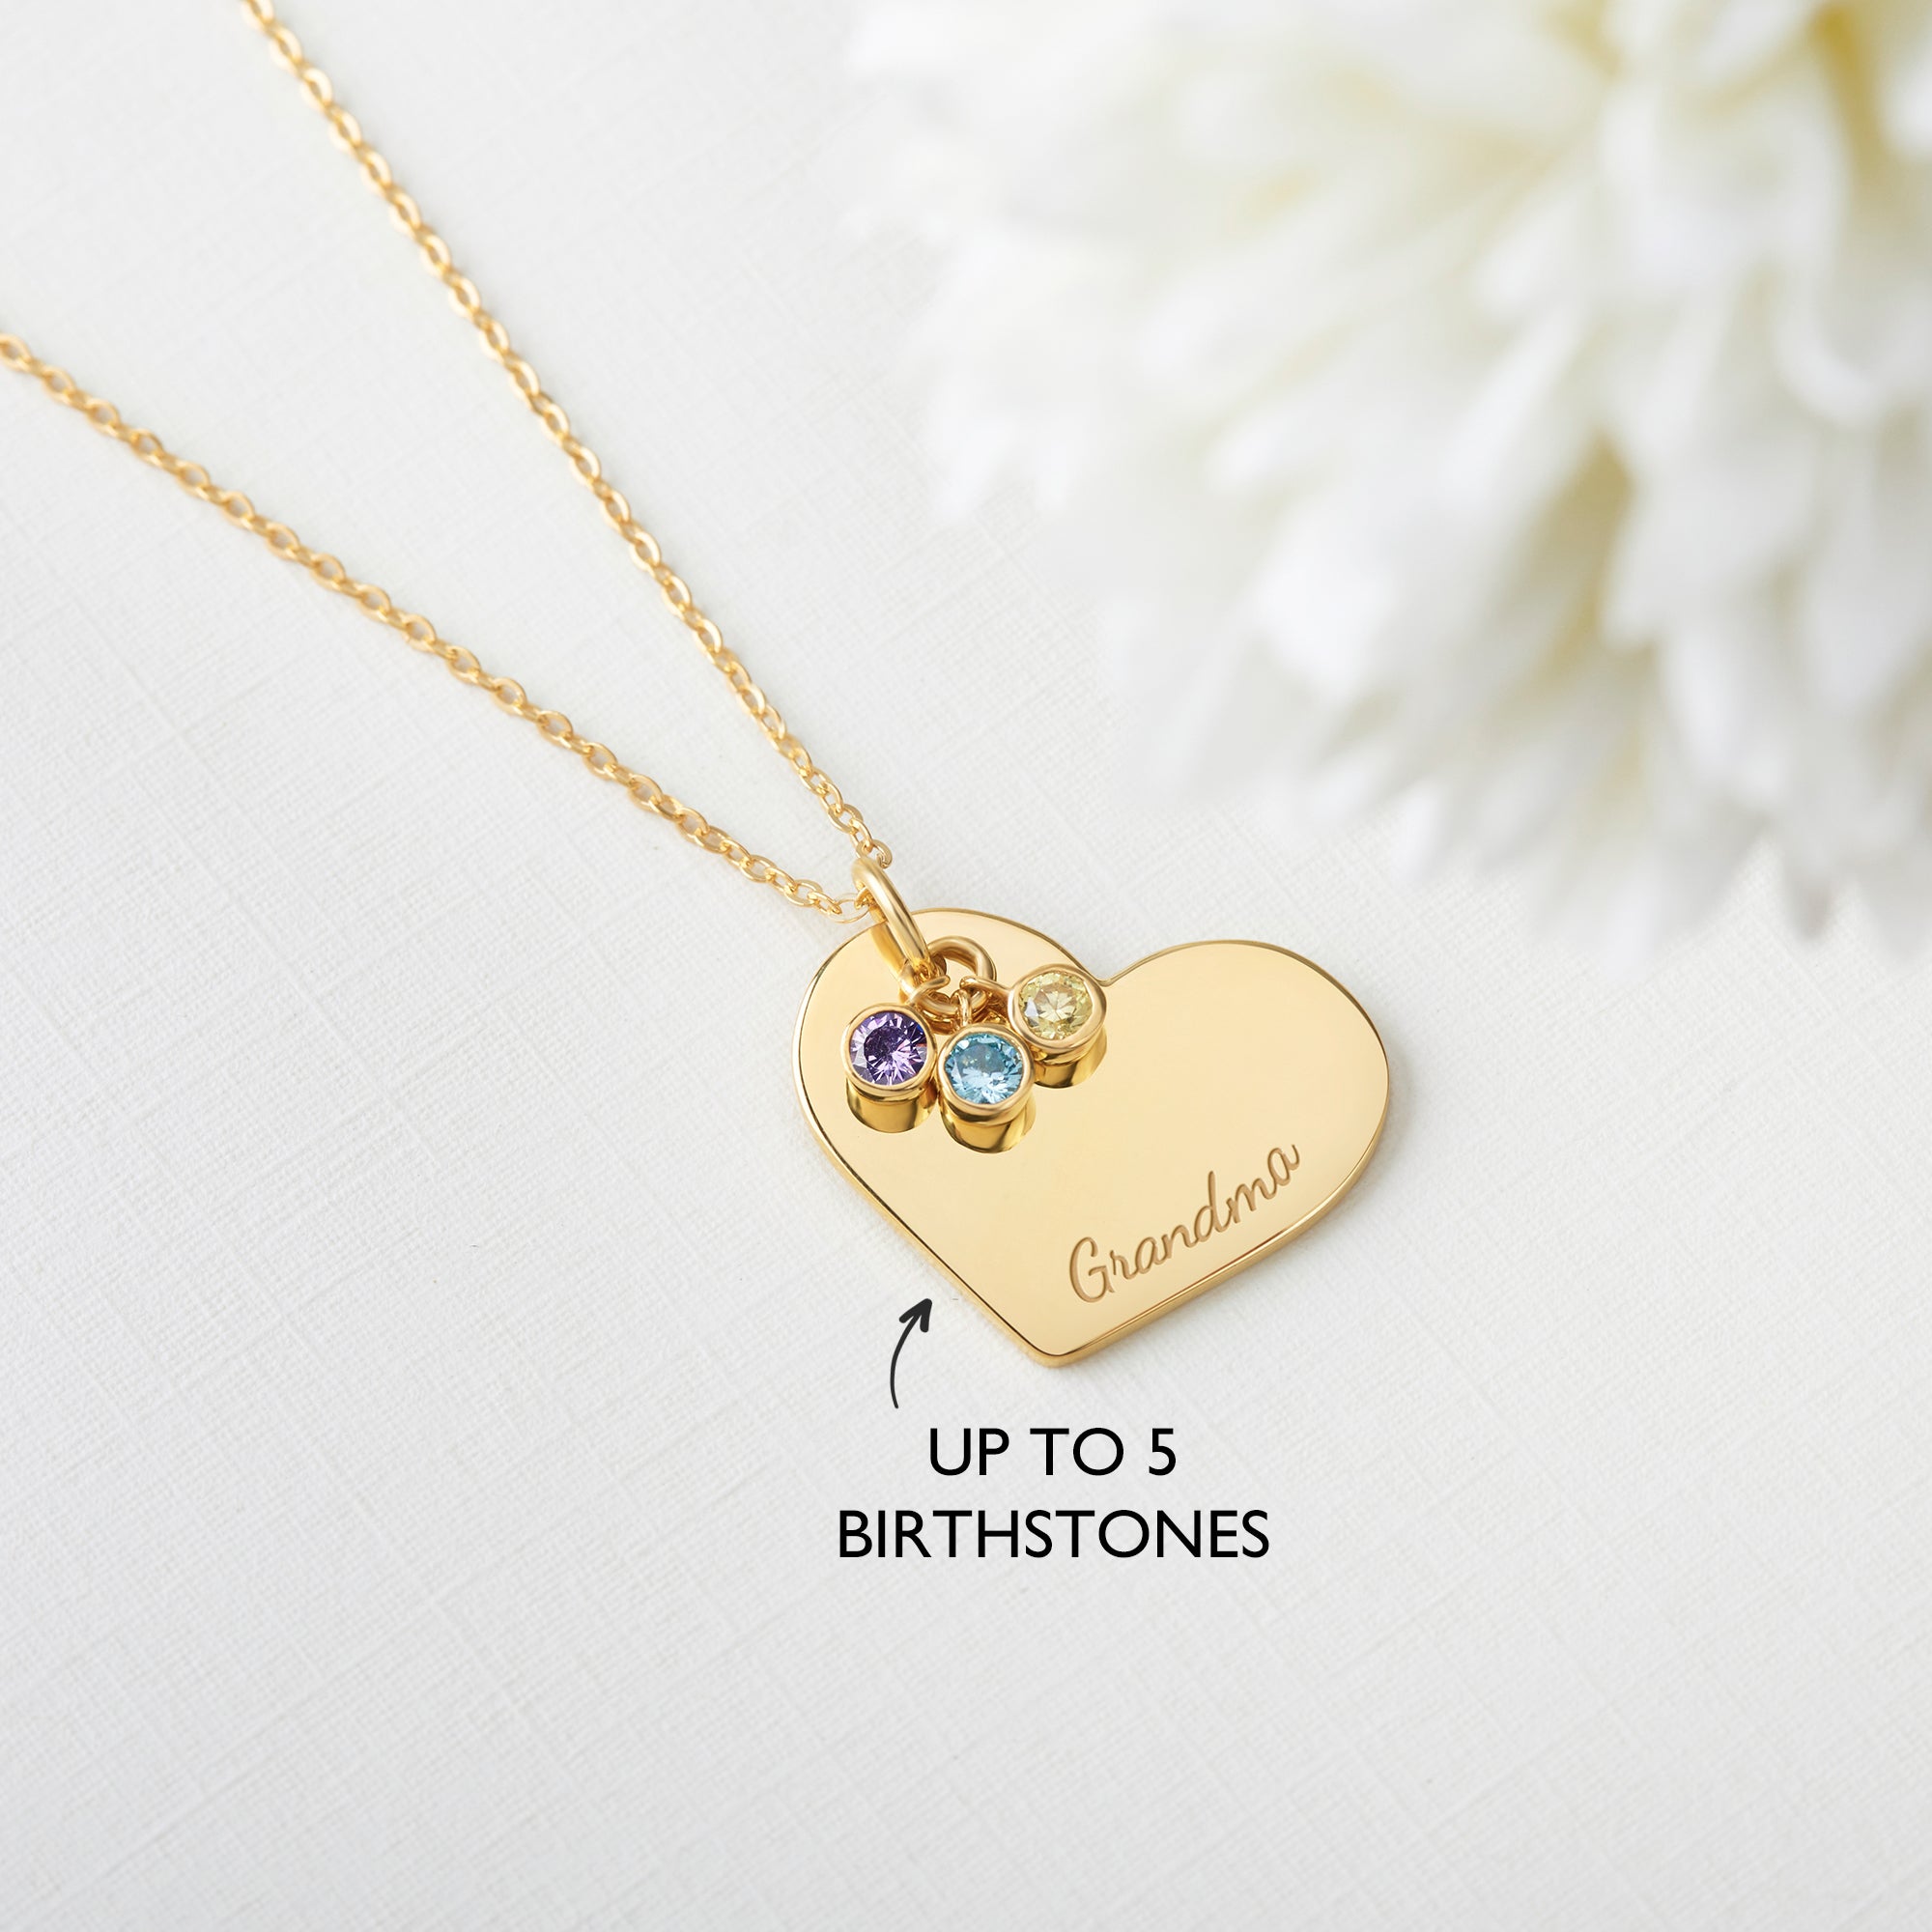 Personalized Family Birthstone Heart Necklace - Grandma Gift Idea - Necklaces - Bijou Her -  -  - 